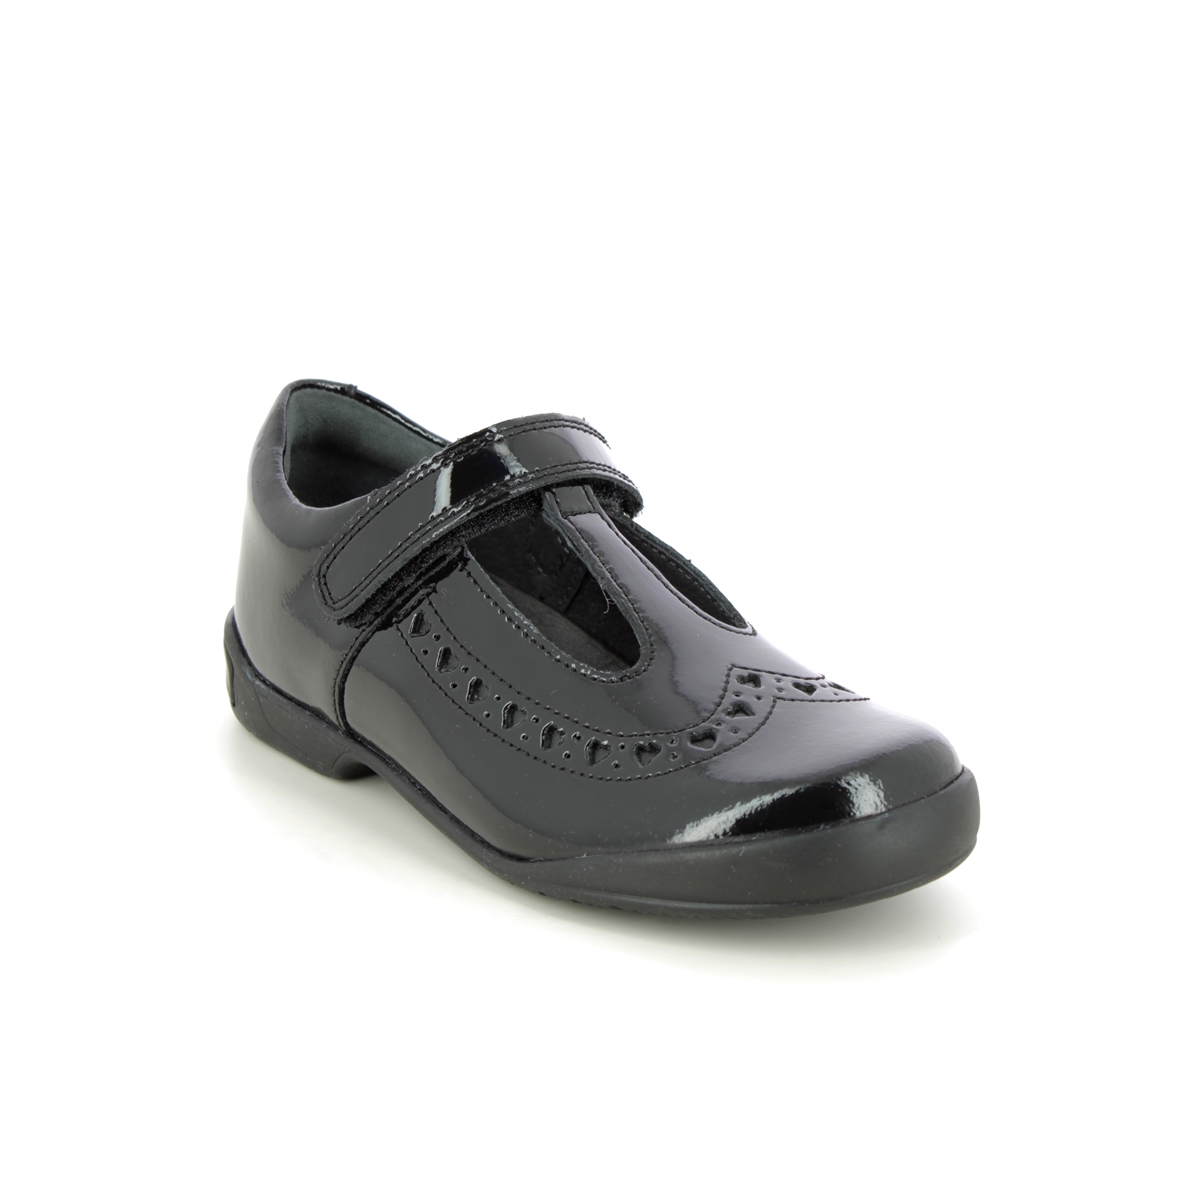 Start Rite Leapfrog Black patent Kids girls school shoes 2789-36F in a Plain Leather in Size 2